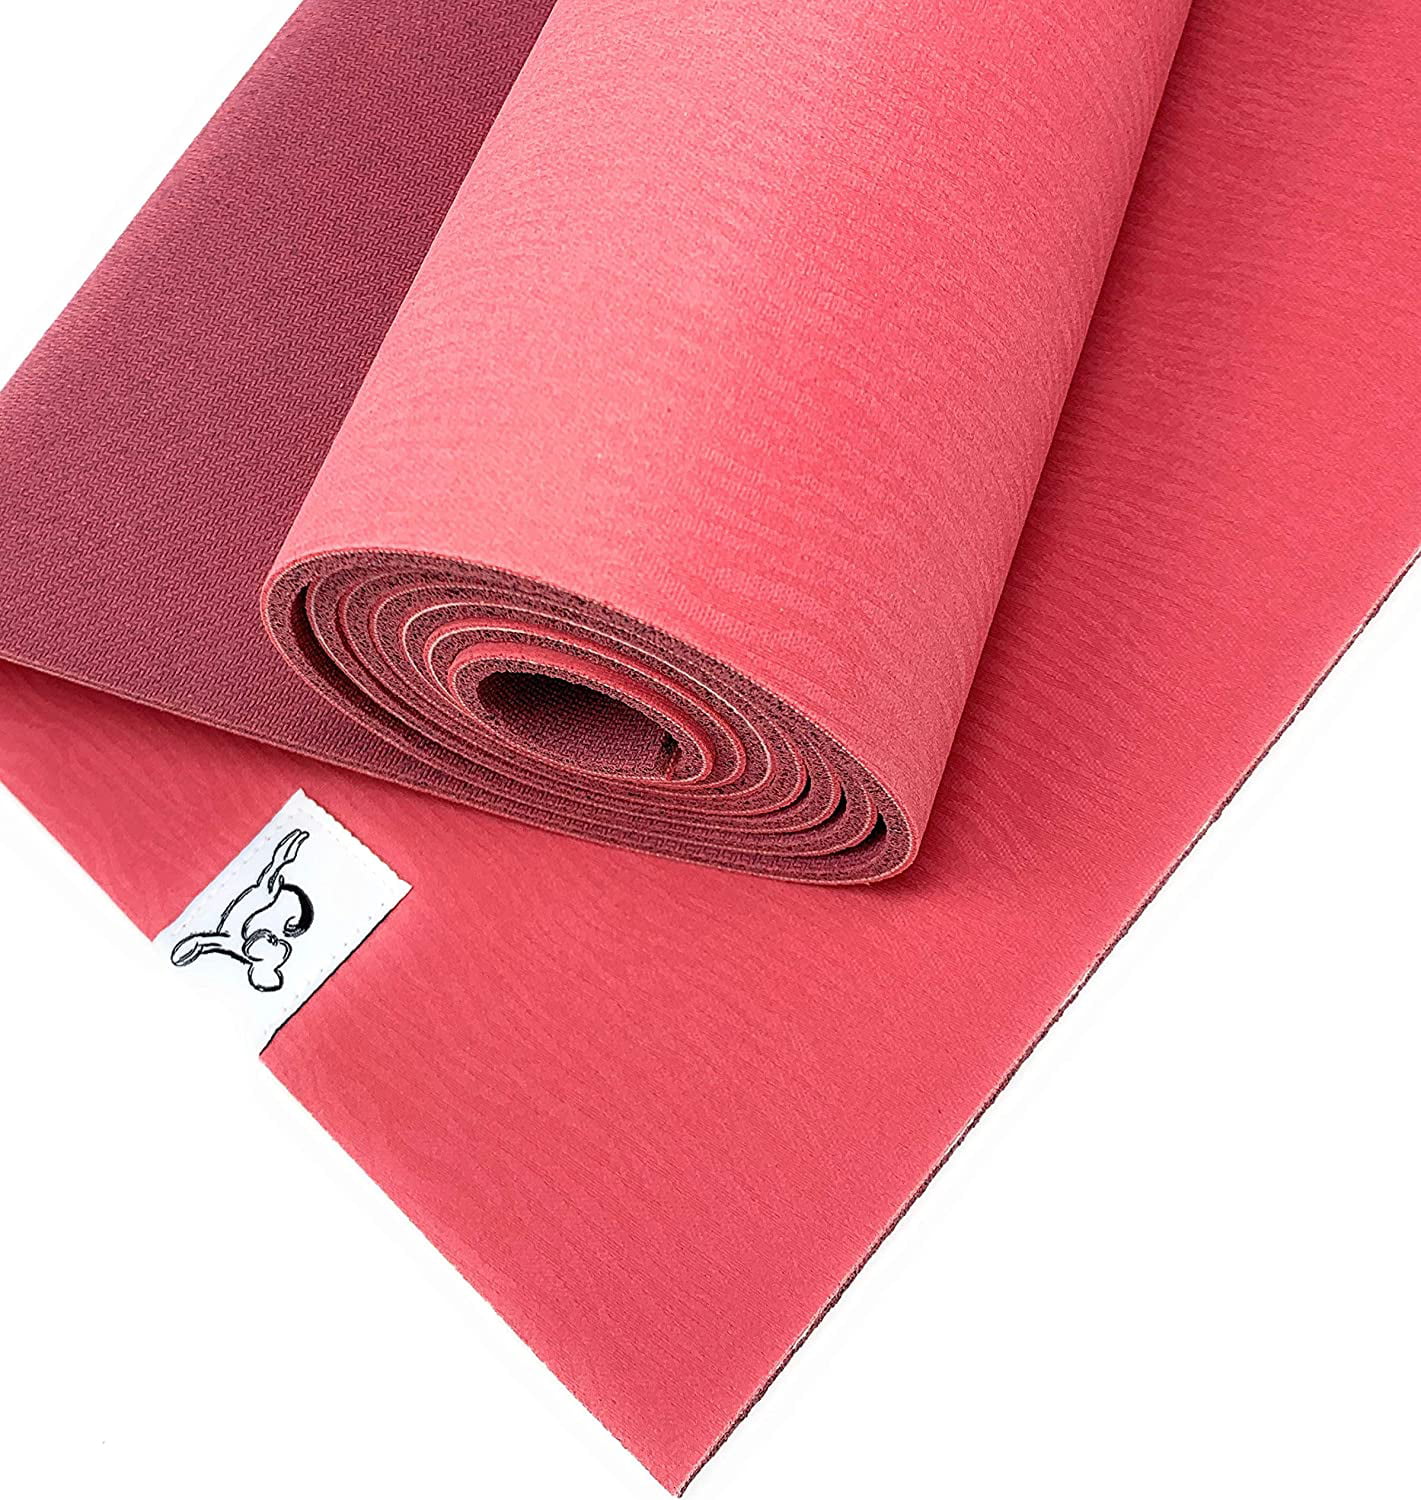 generic mat - Natural Tree Rubber Mat, Eco Friendly ,Non Slip, Cushioning for Support and Stability in Pilates, and General Fitness - Walmart.com